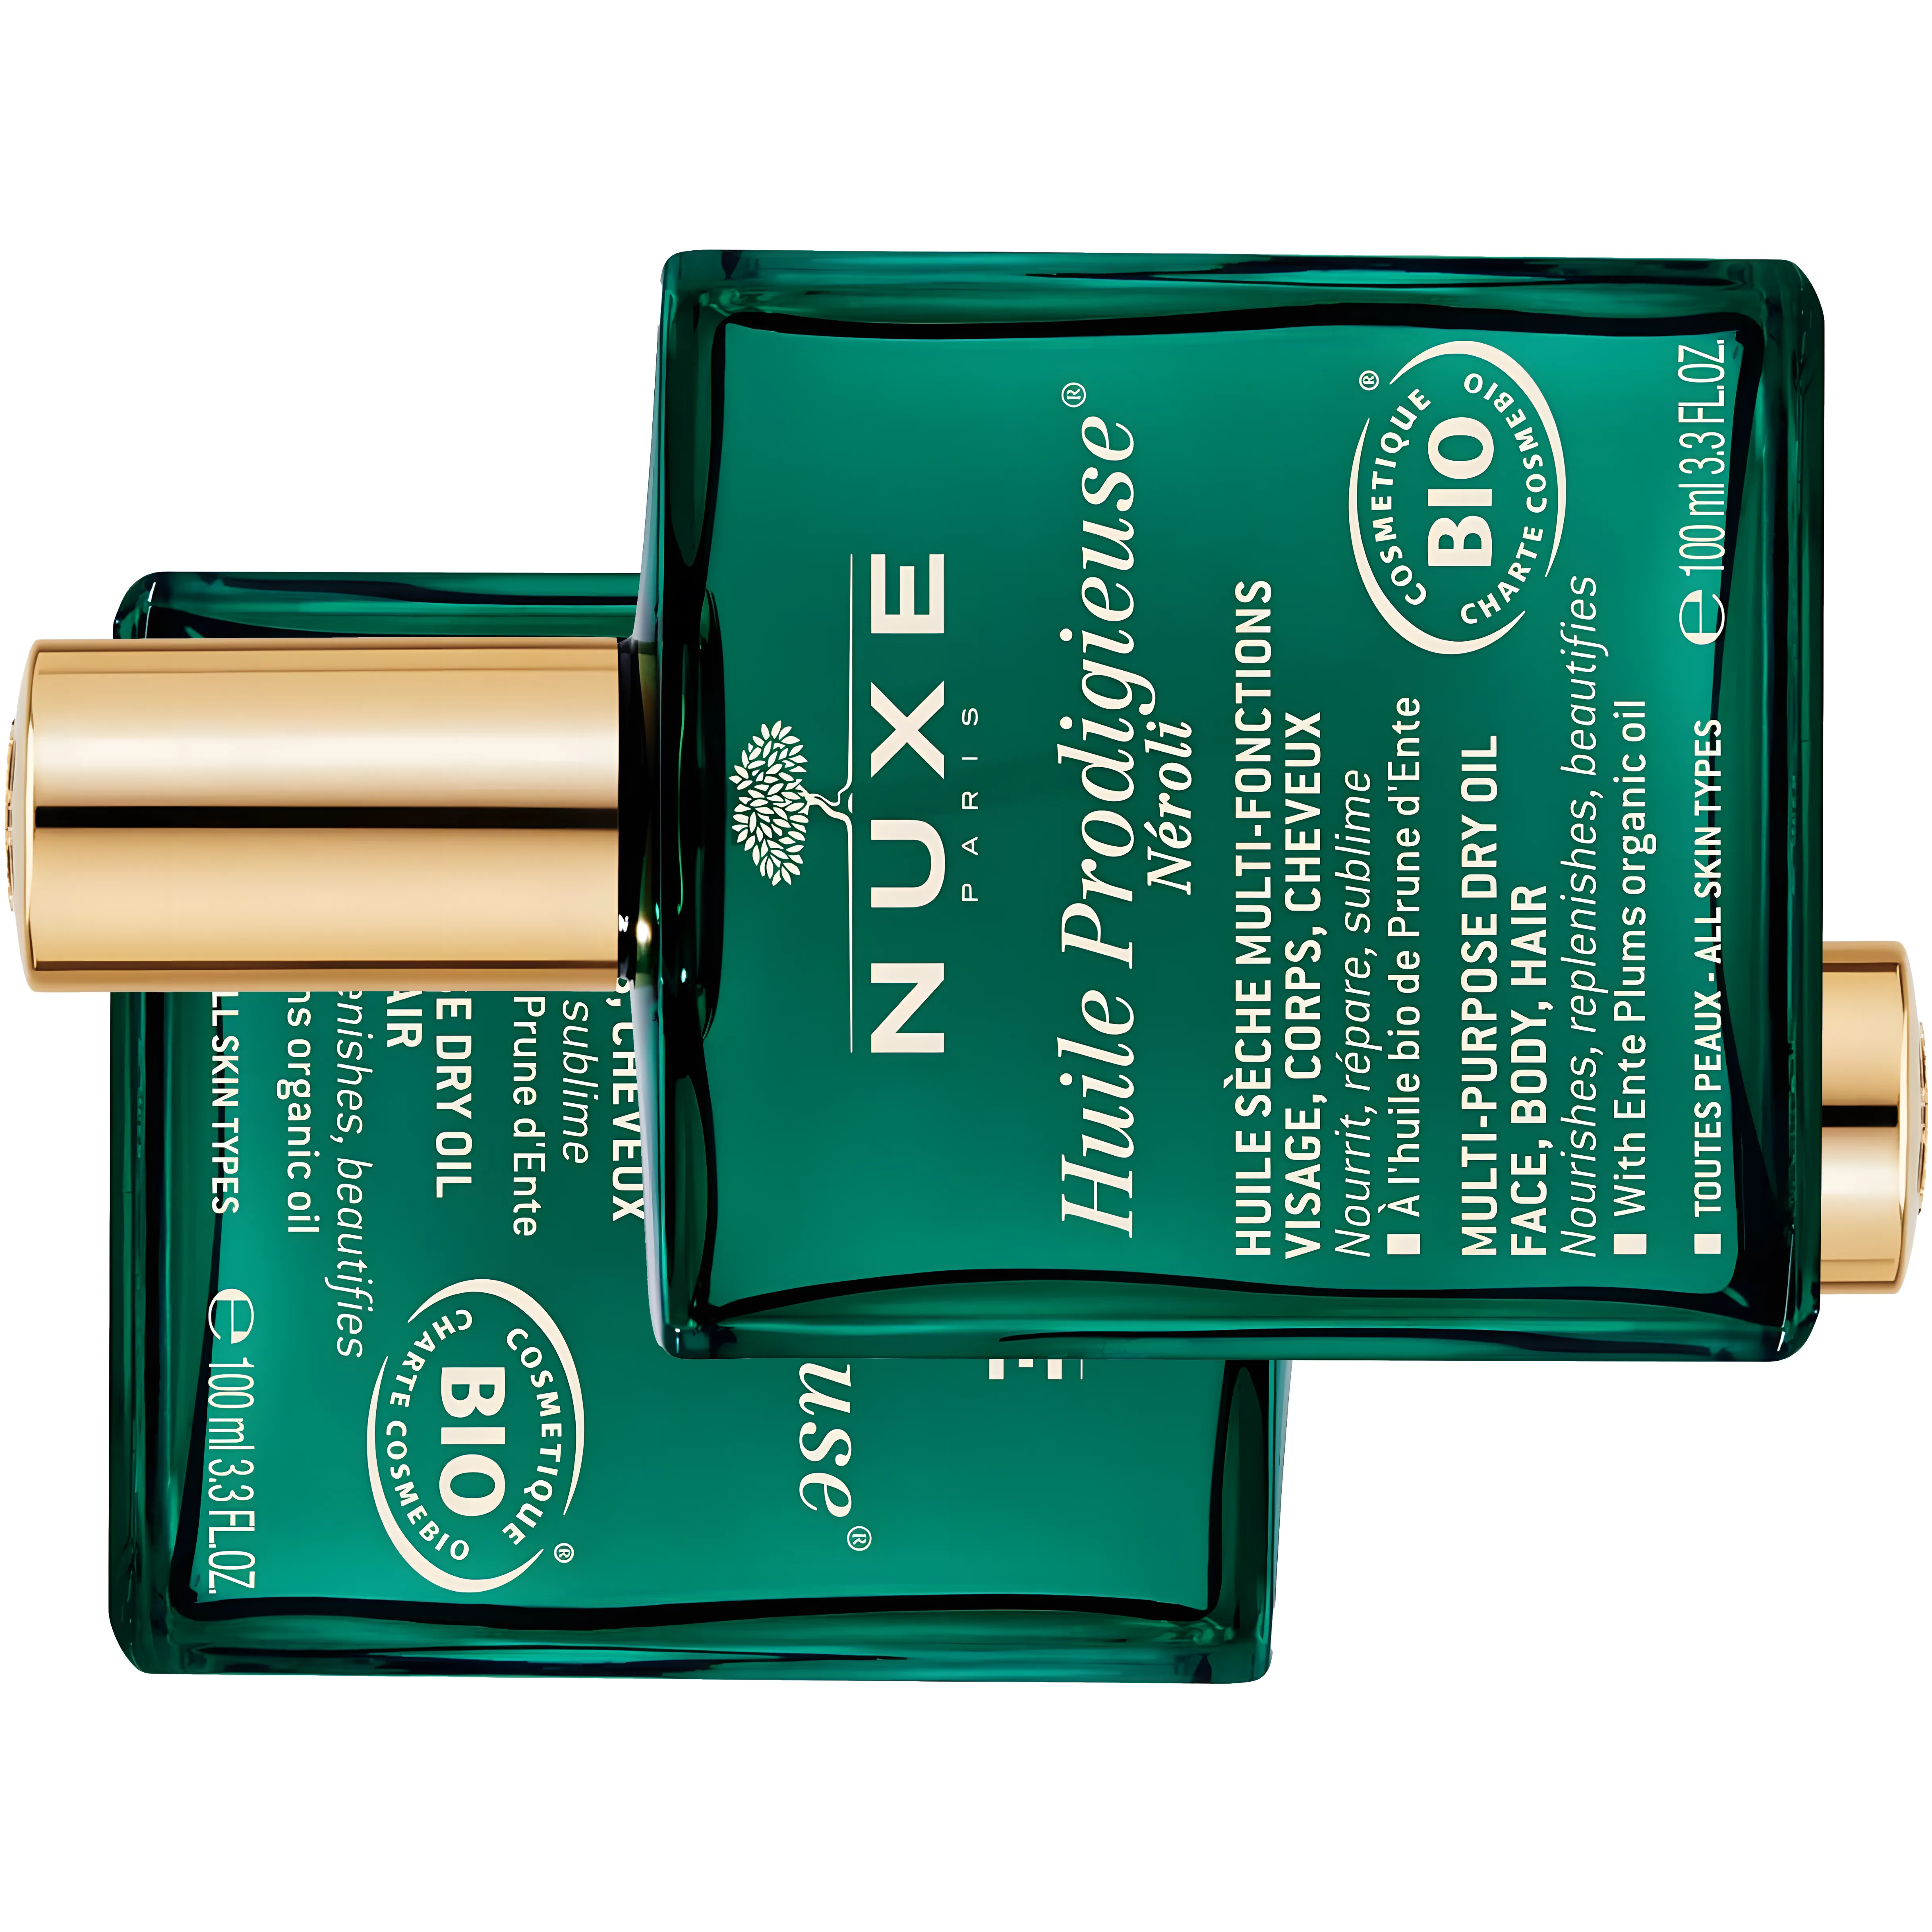 Free Nuxe Paris Beauty Products